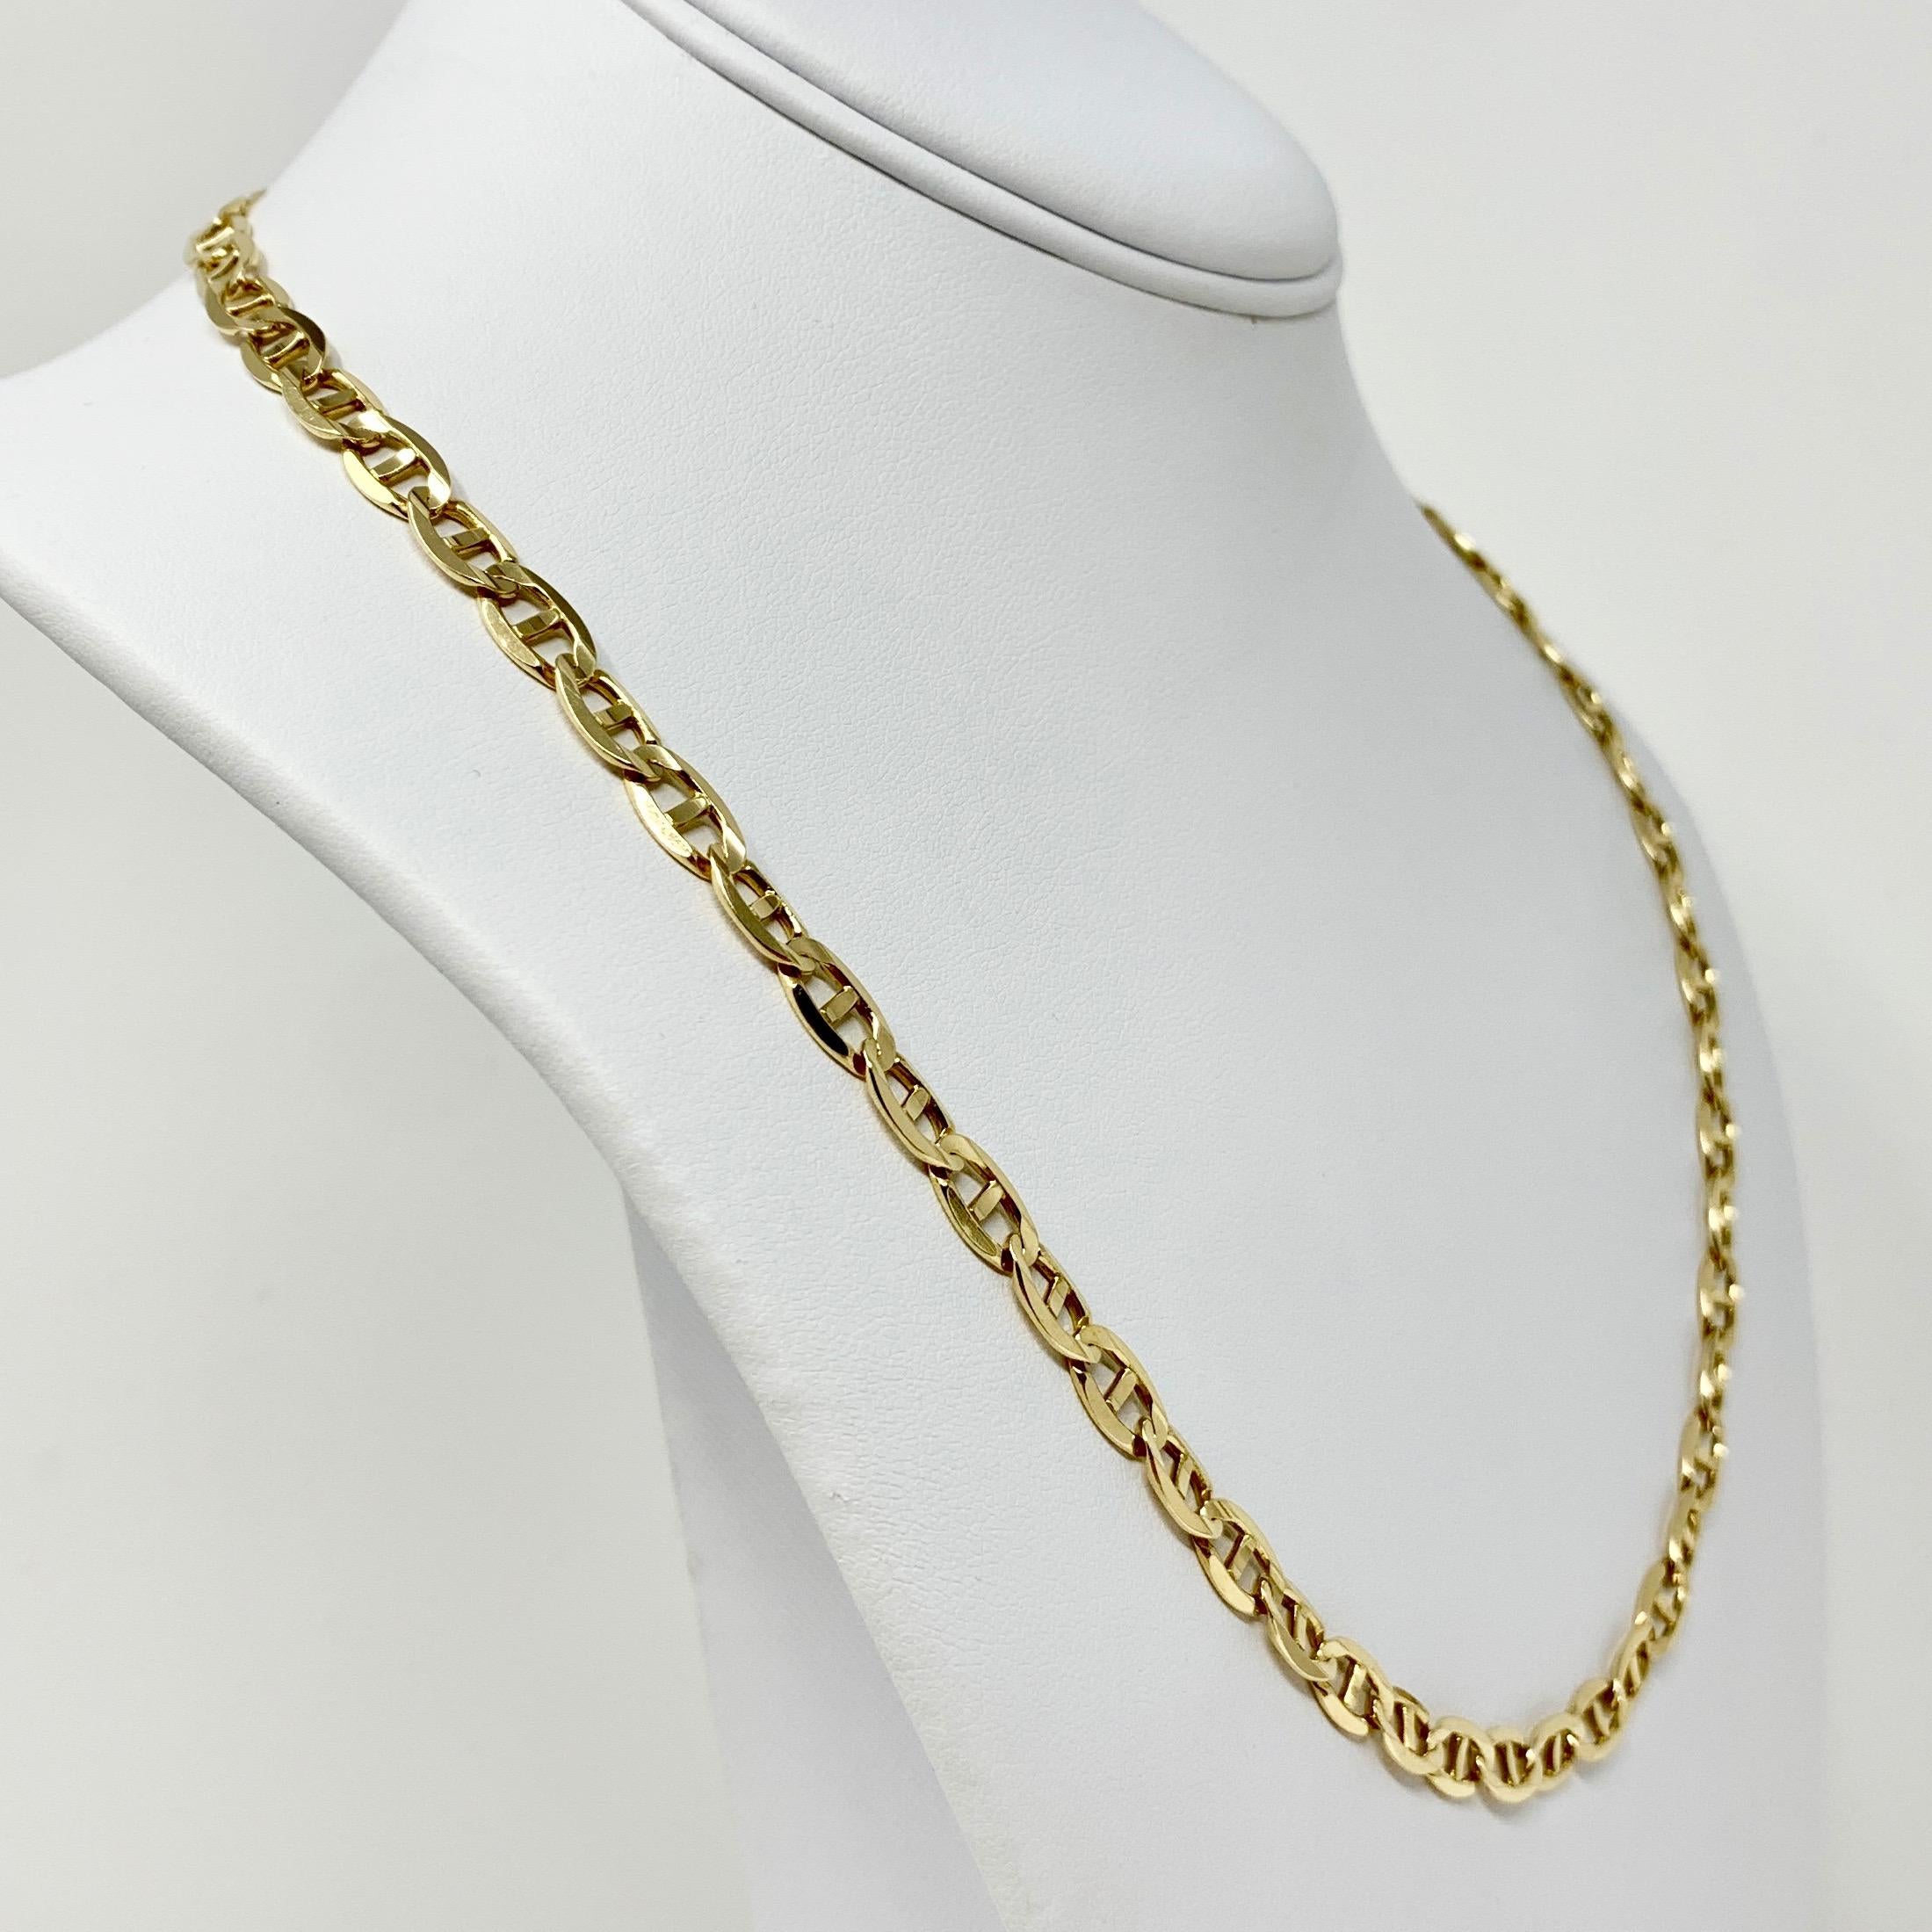 14k Yellow Gold 25.5g Solid 6mm Gucci Mariner Link Chain Necklace Italy 21